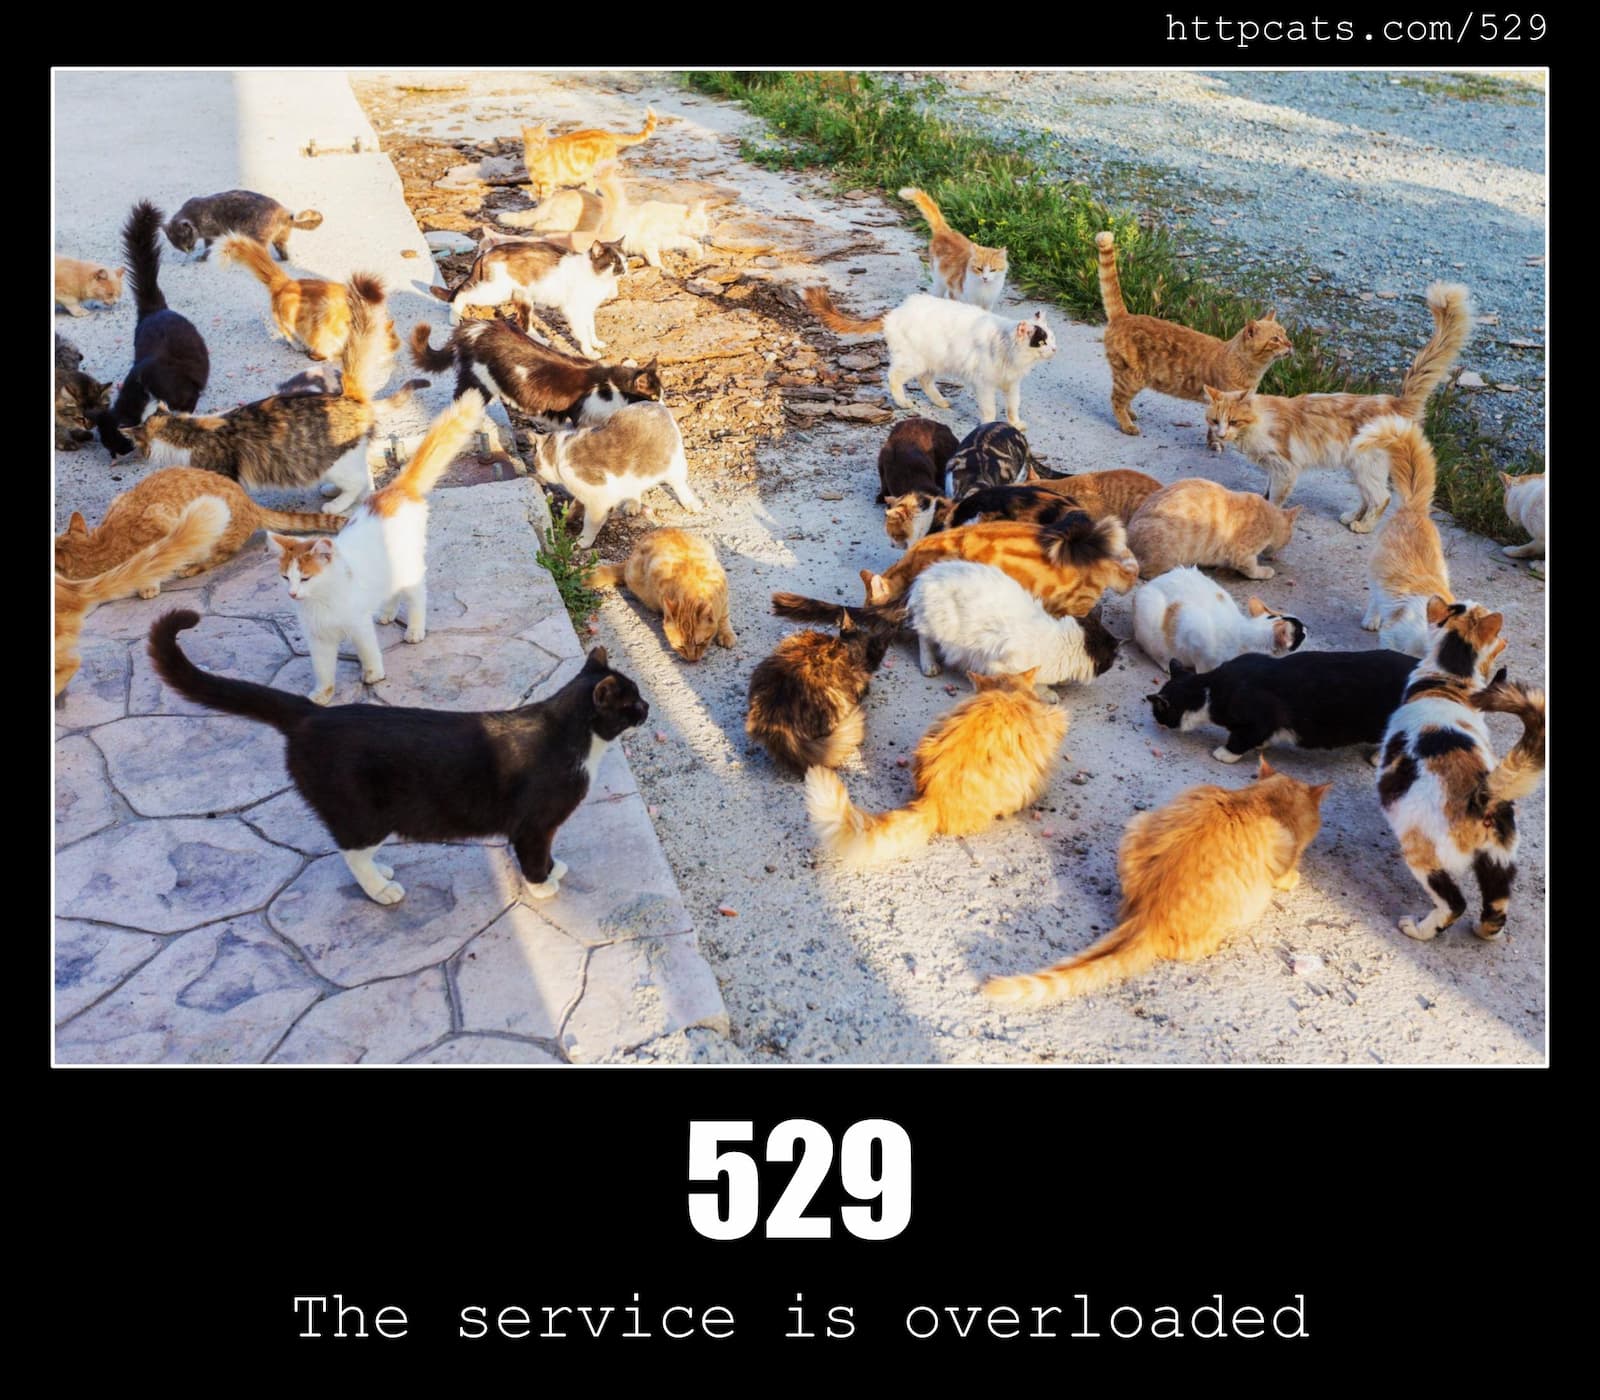 HTTP Status Code 529 The service is overloaded & Cats